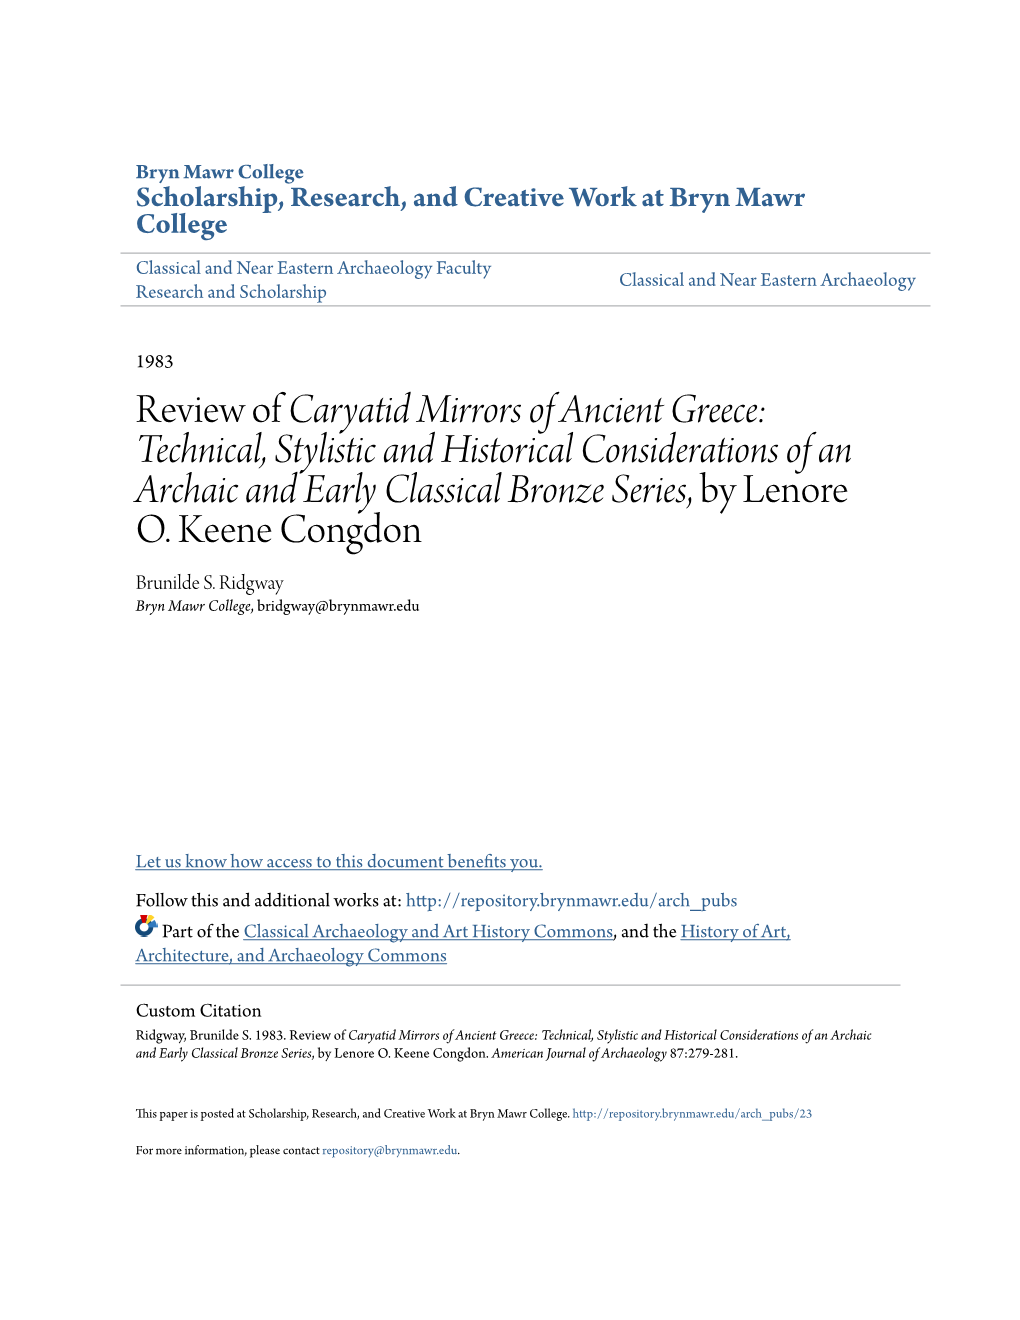 Review of Caryatid Mirrors of Ancient Greece: Technical, Stylistic and Historical Considerations of an Archaic and Early Classical Bronze Series, by Lenore O